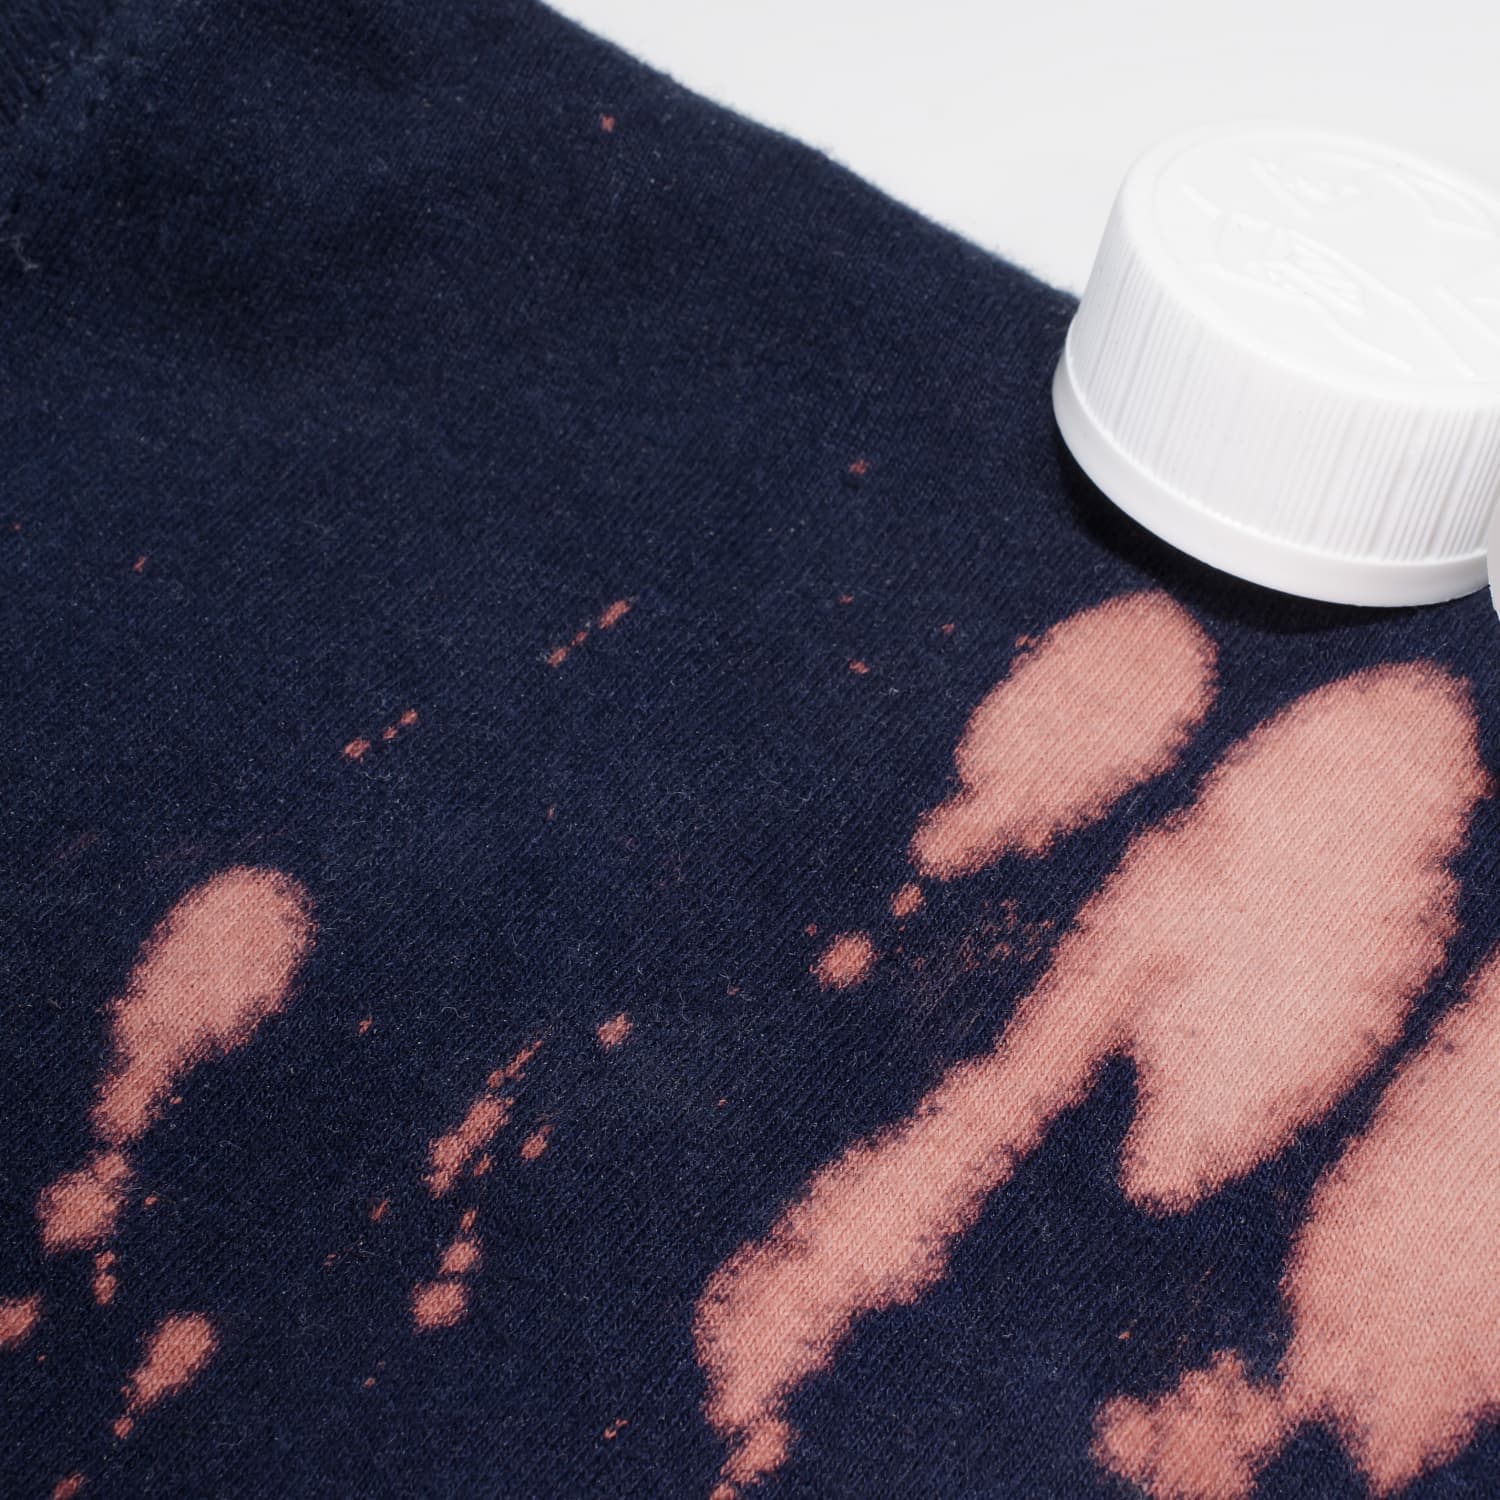 What is the best way to get rid of small bleach stains on black